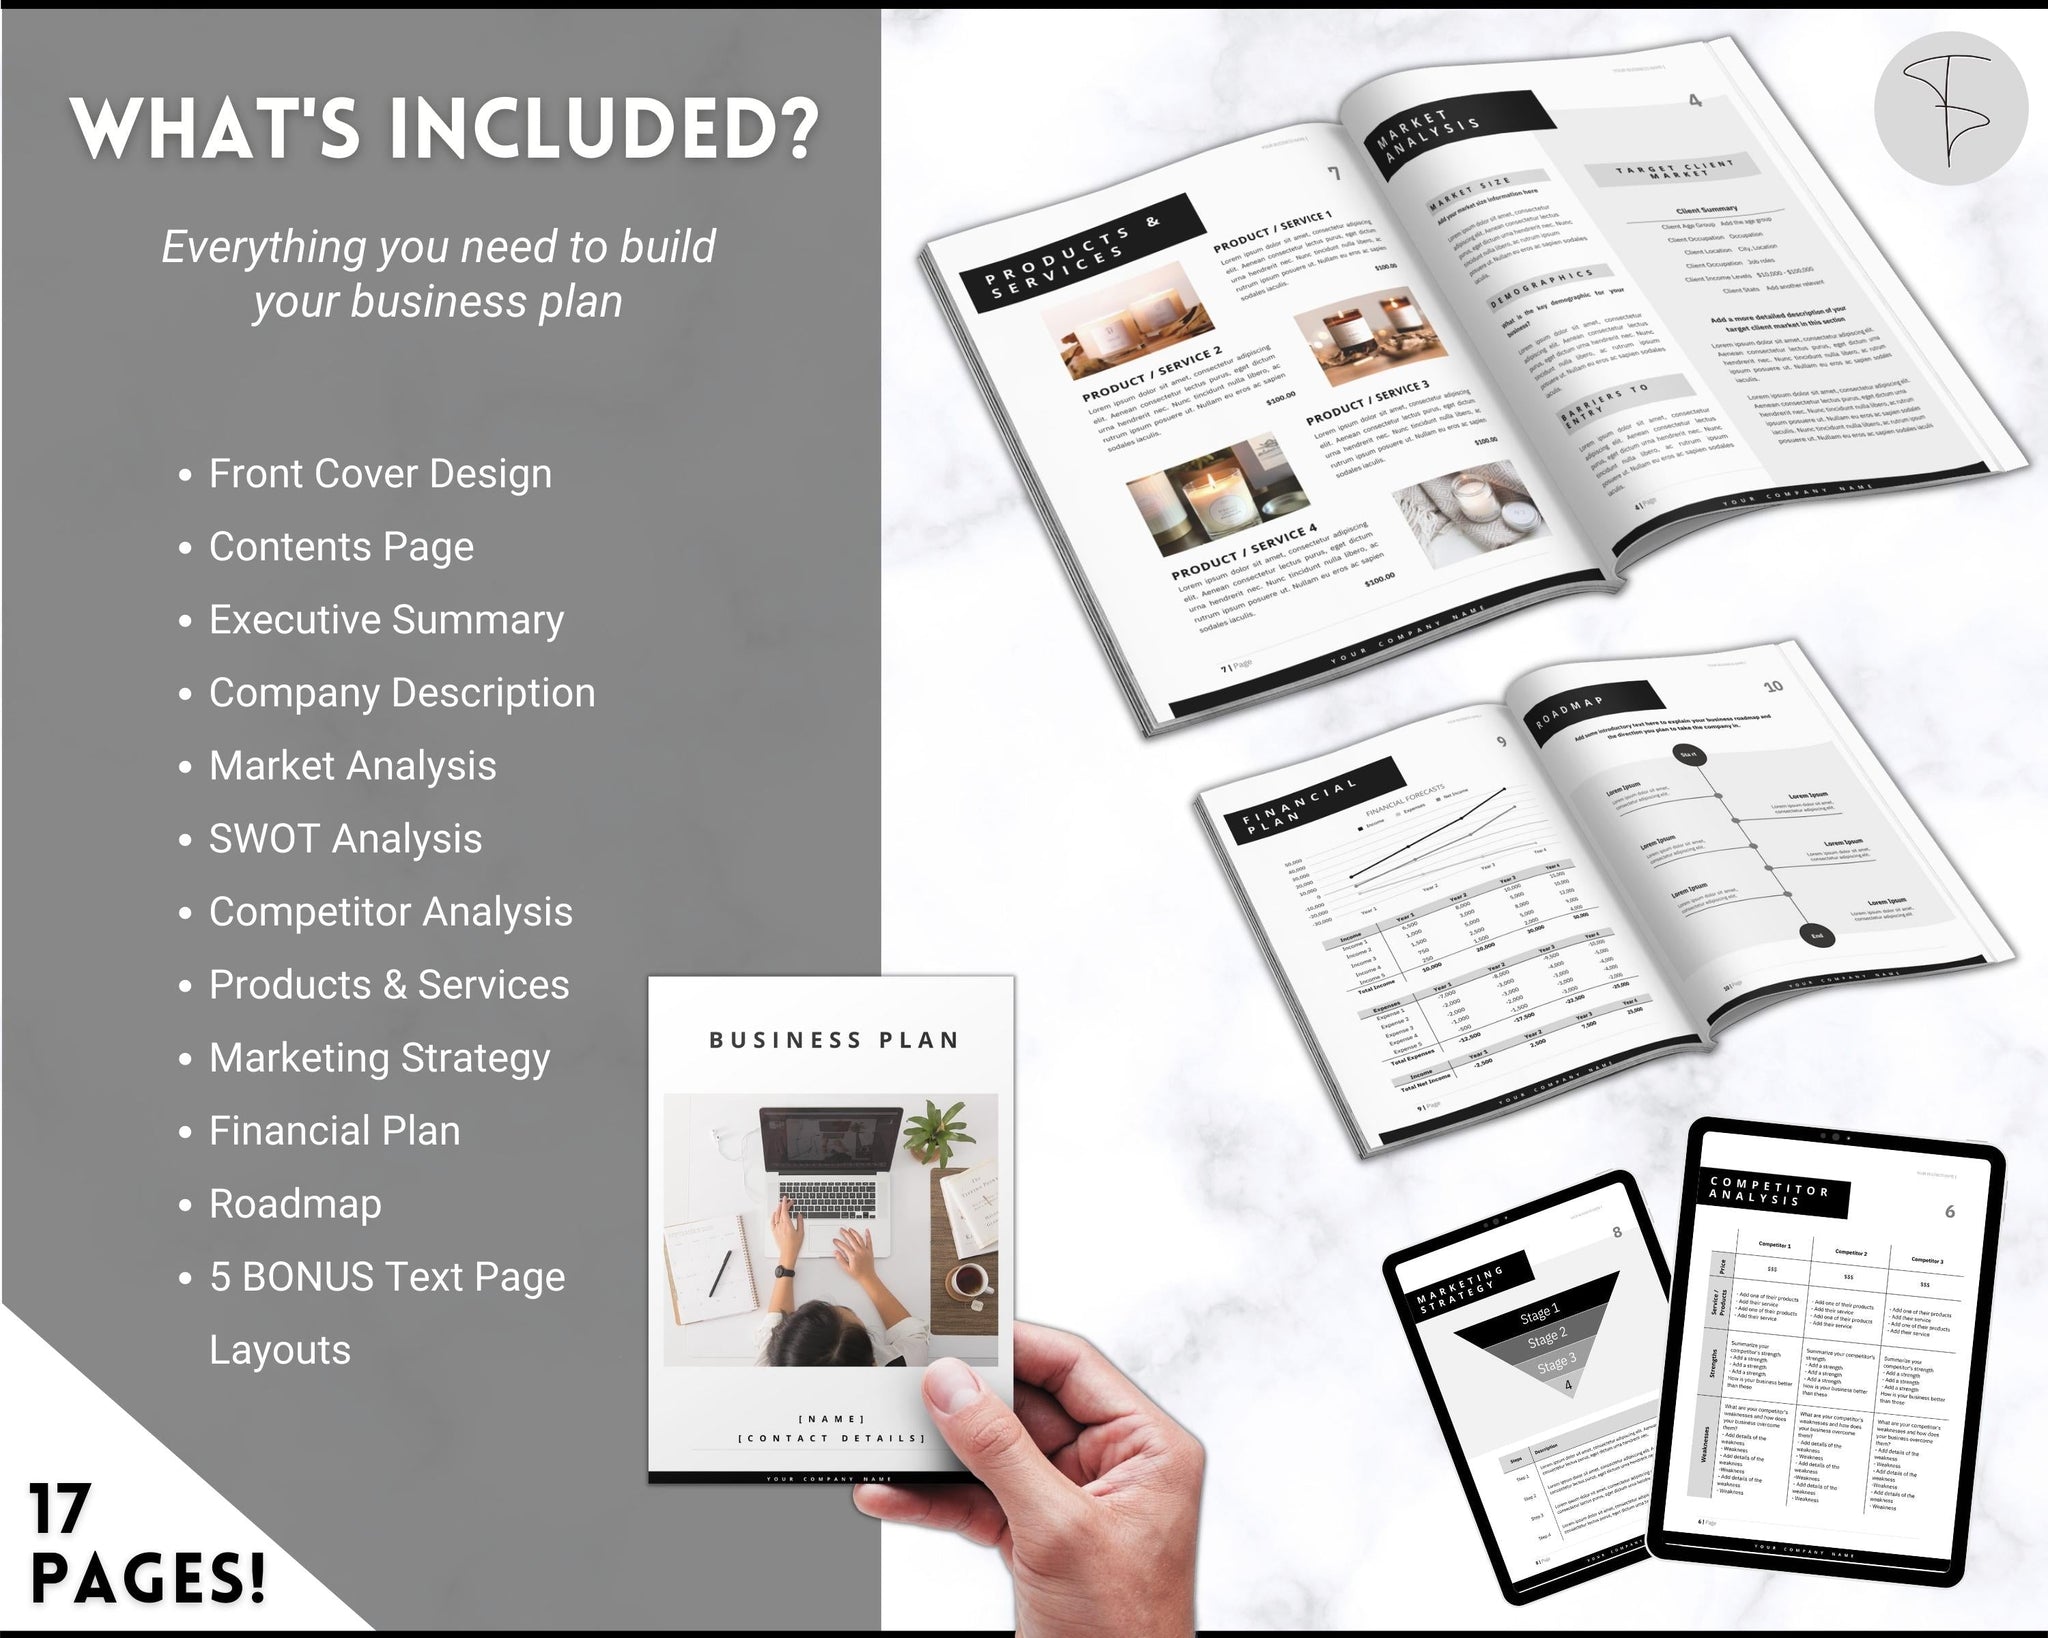 Business Proposal Template, Small Business Planner, Start up Workbook,  Business Plan Analysis, Canva, Word, Side Hustle, EDITABLE Plan 